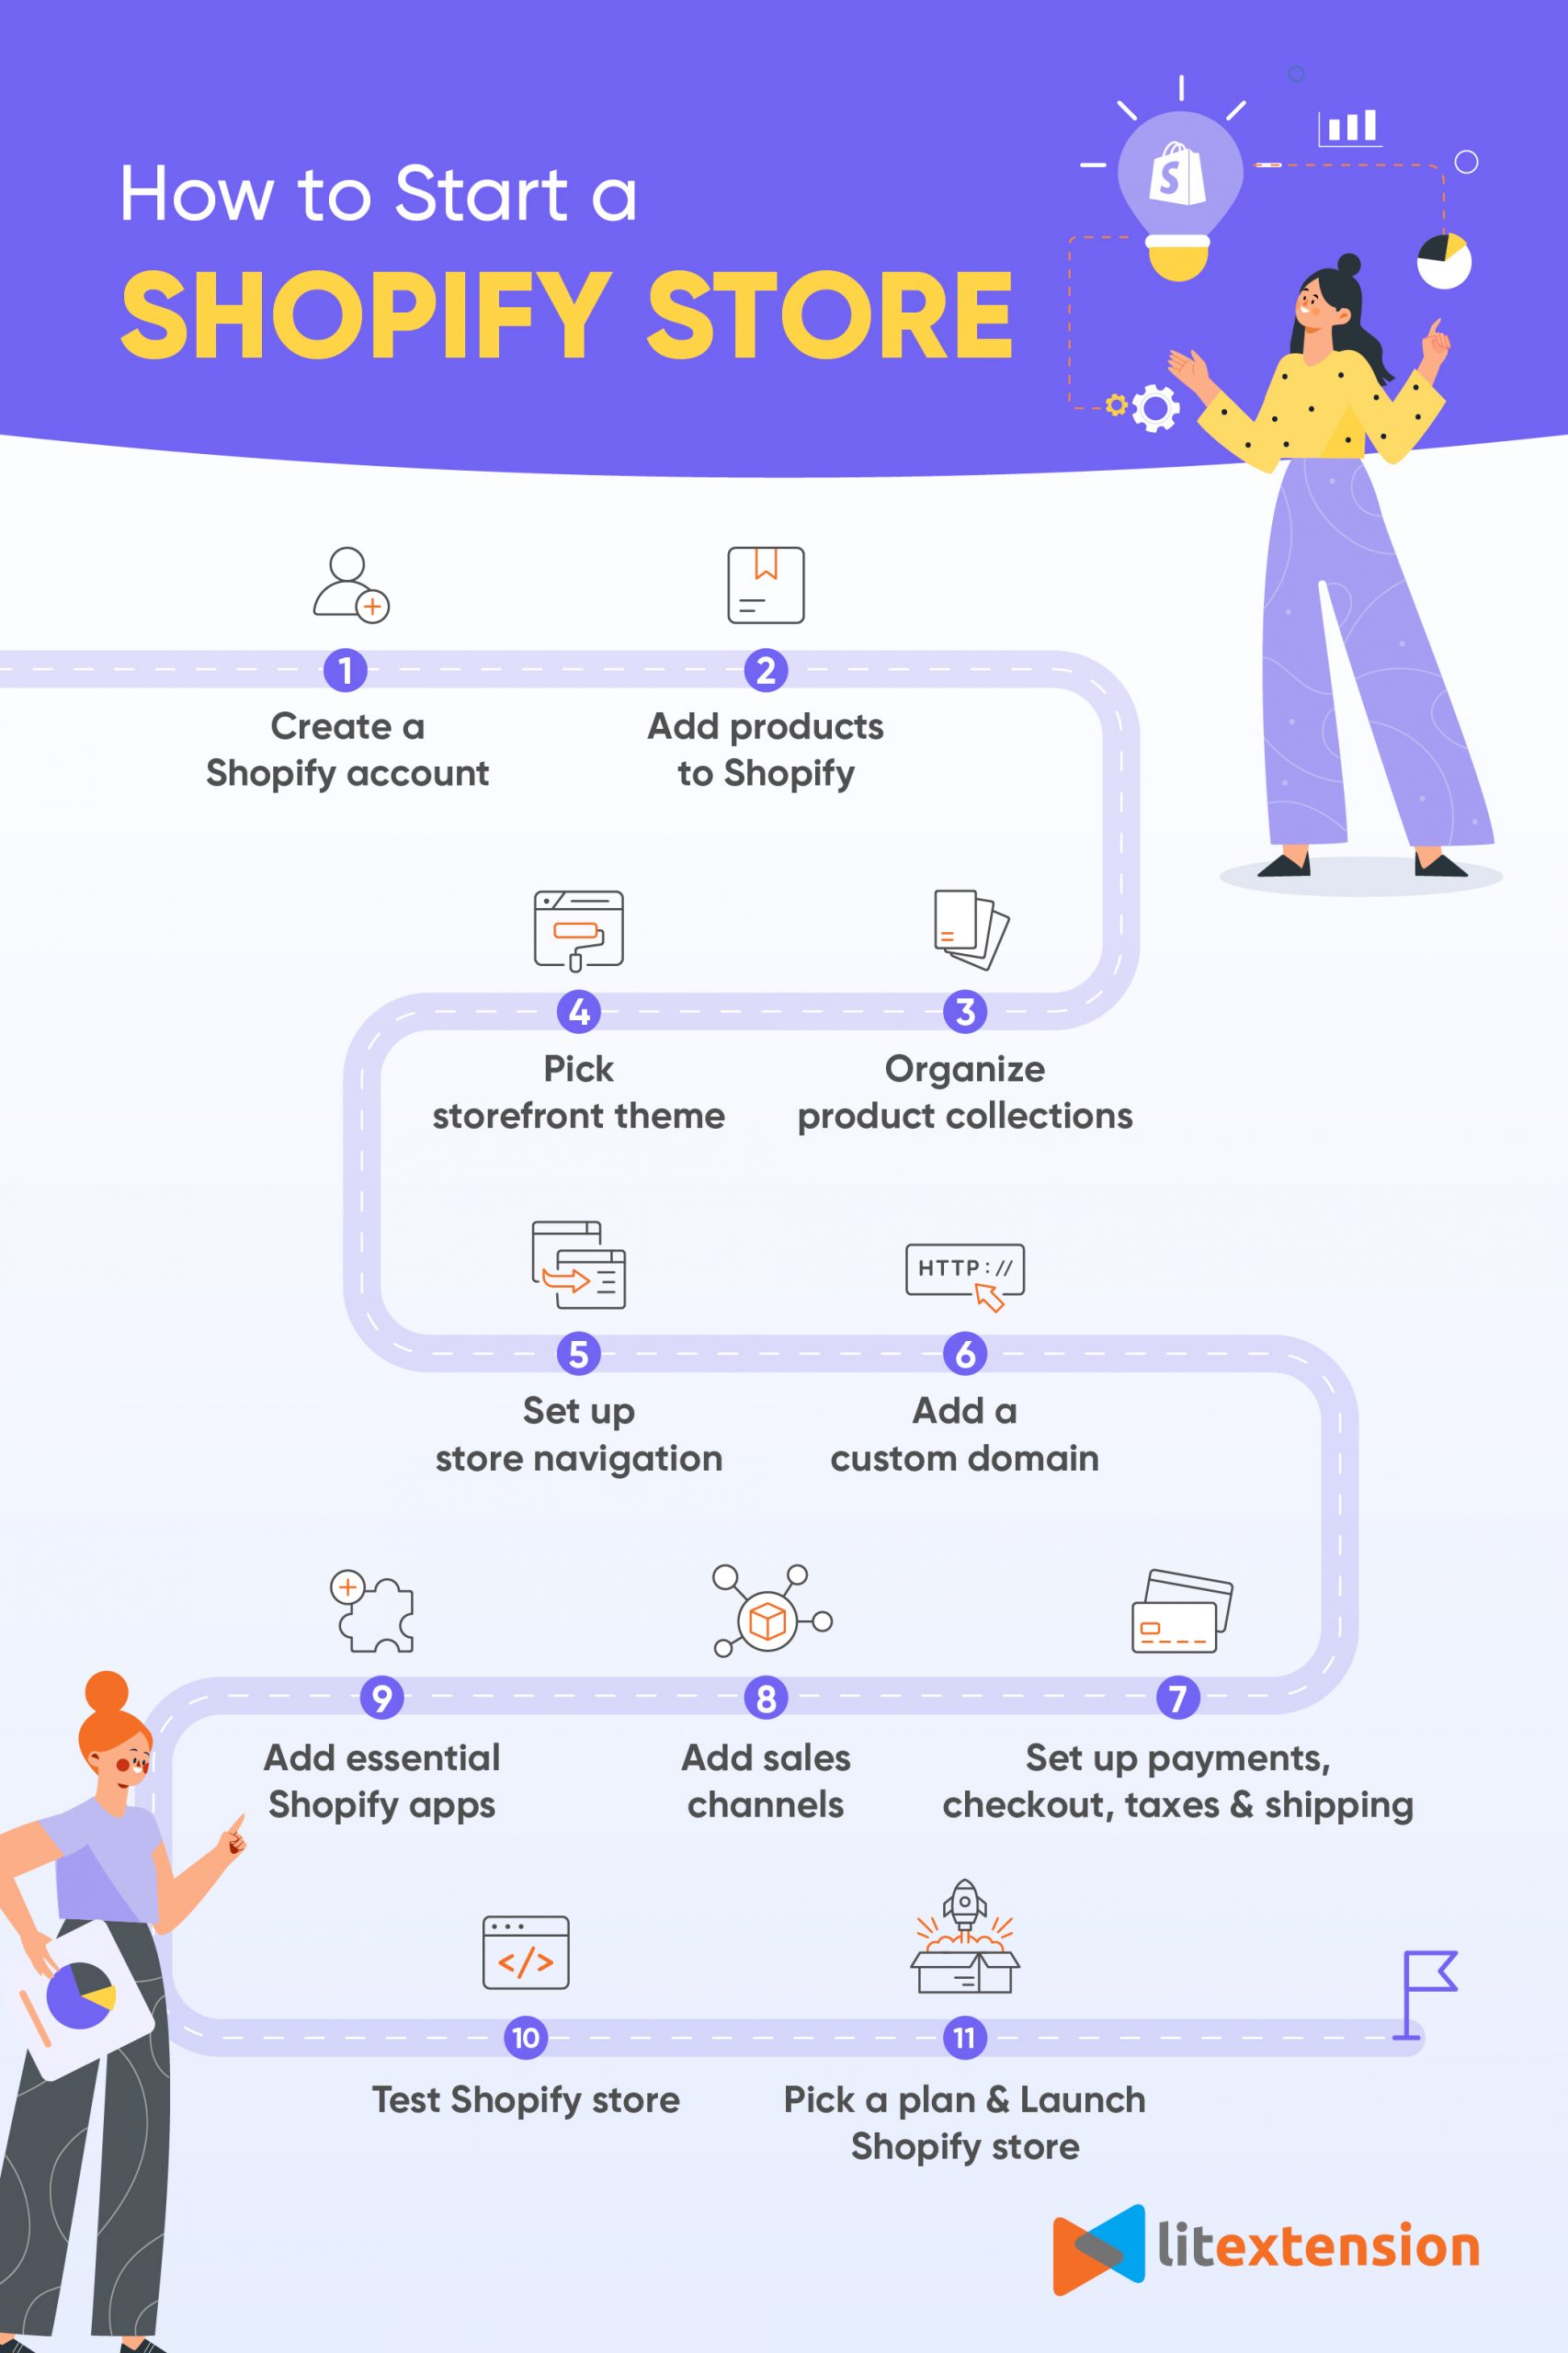 start a Shopify store infographic